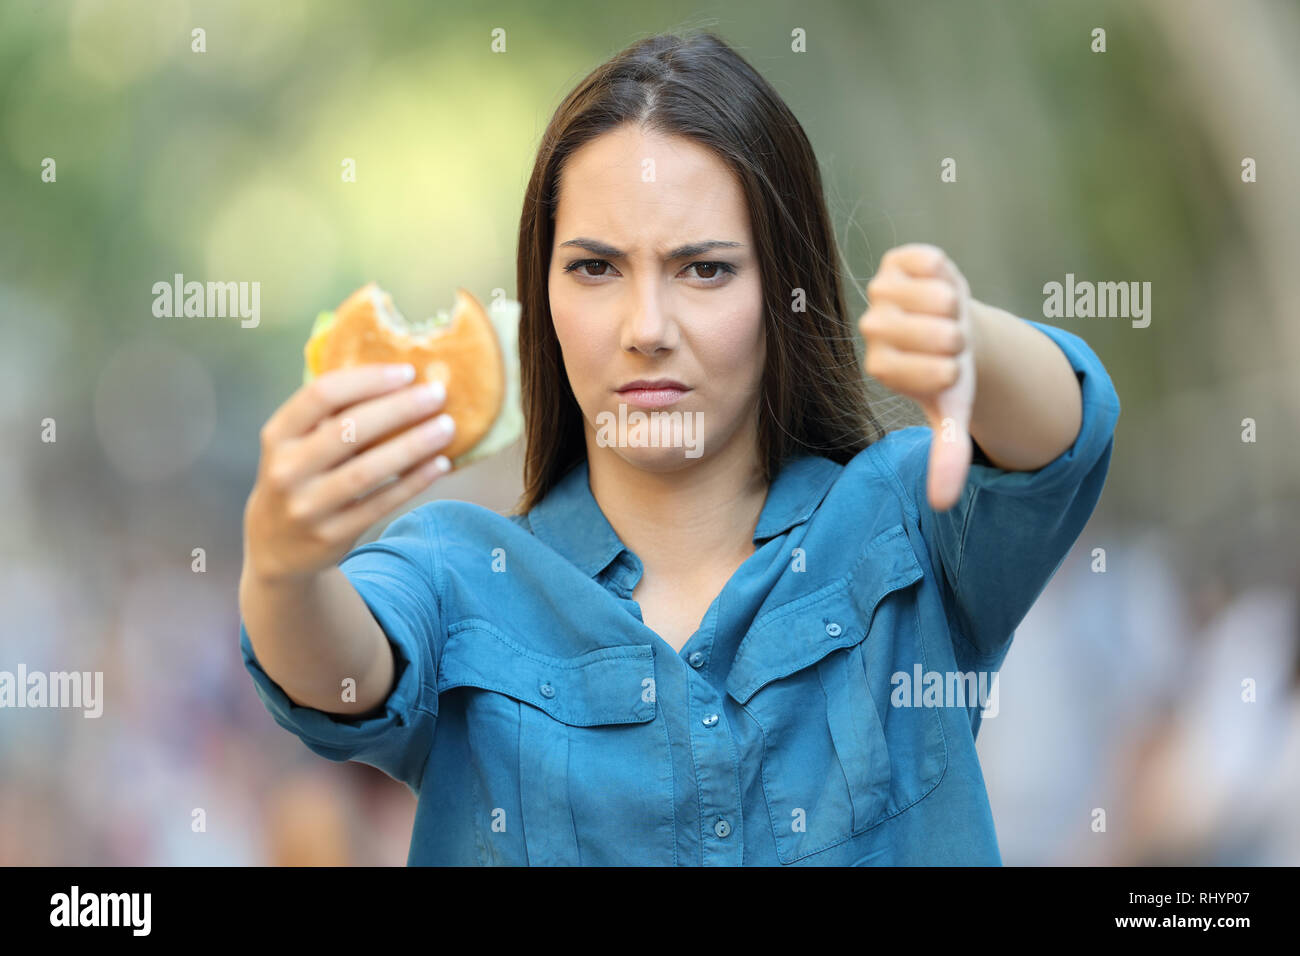 Front view of annoyed woman holding a burger with thumb down in the street Stock Photo